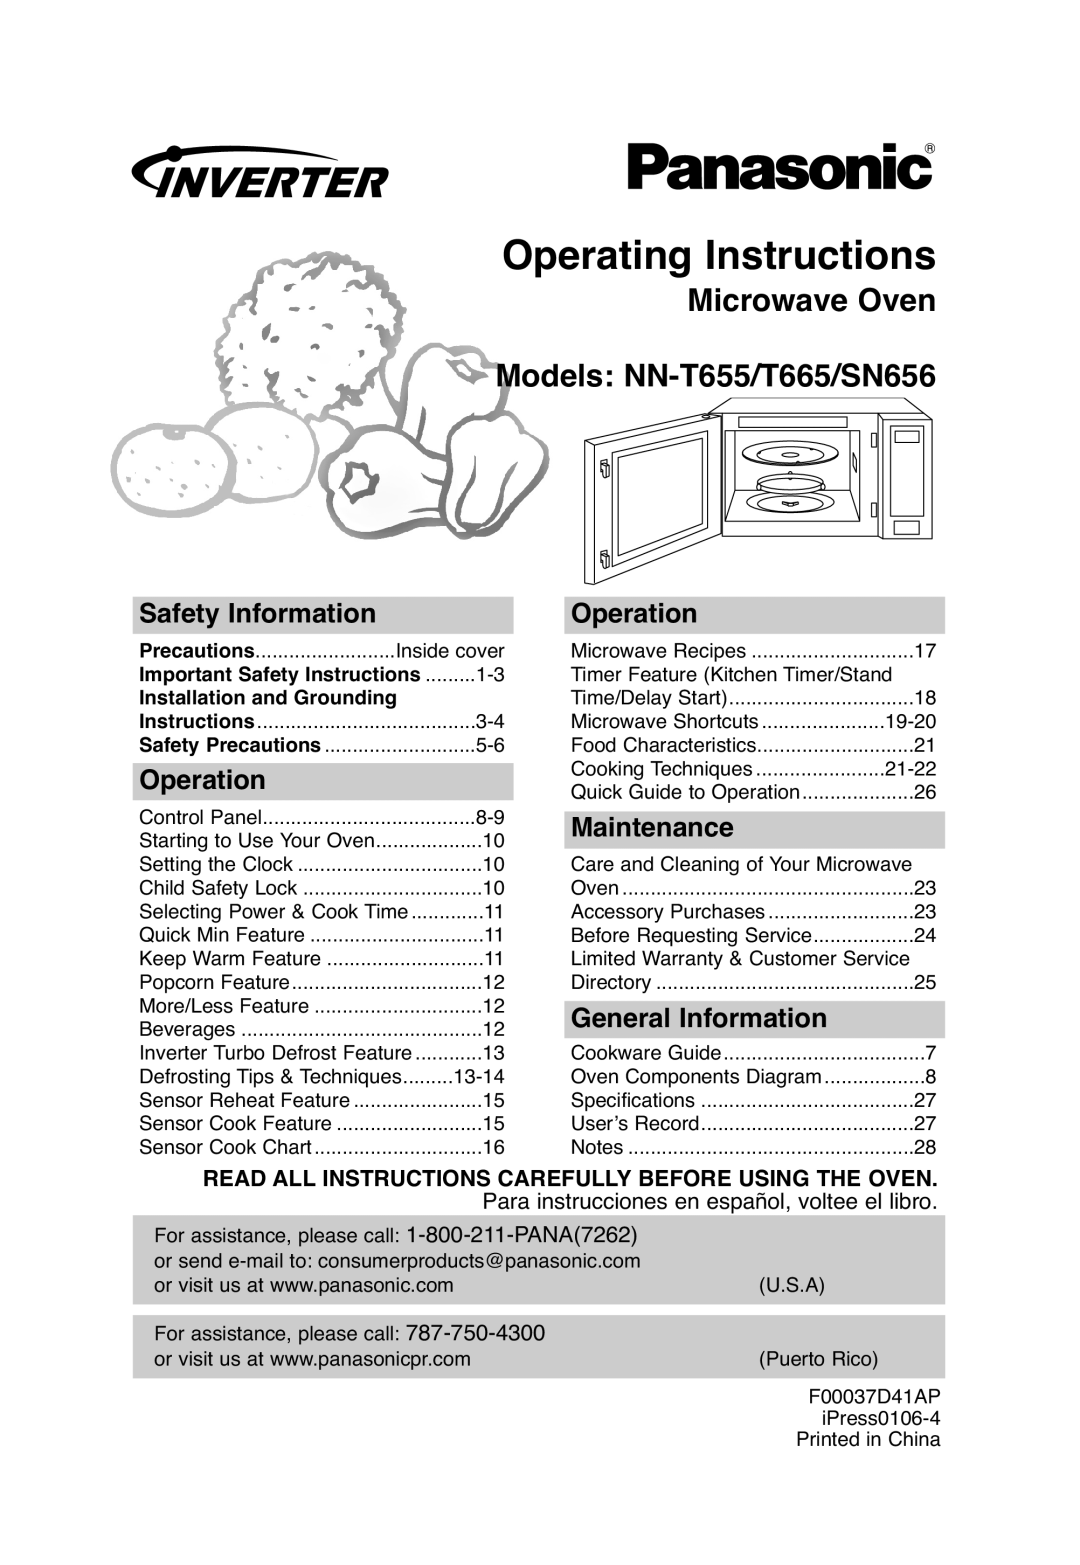 Panasonic NN-T665, NN-SN656 important safety instructions Operating Instructions, Microwave Oven Models NN-T655/T665/SN656 